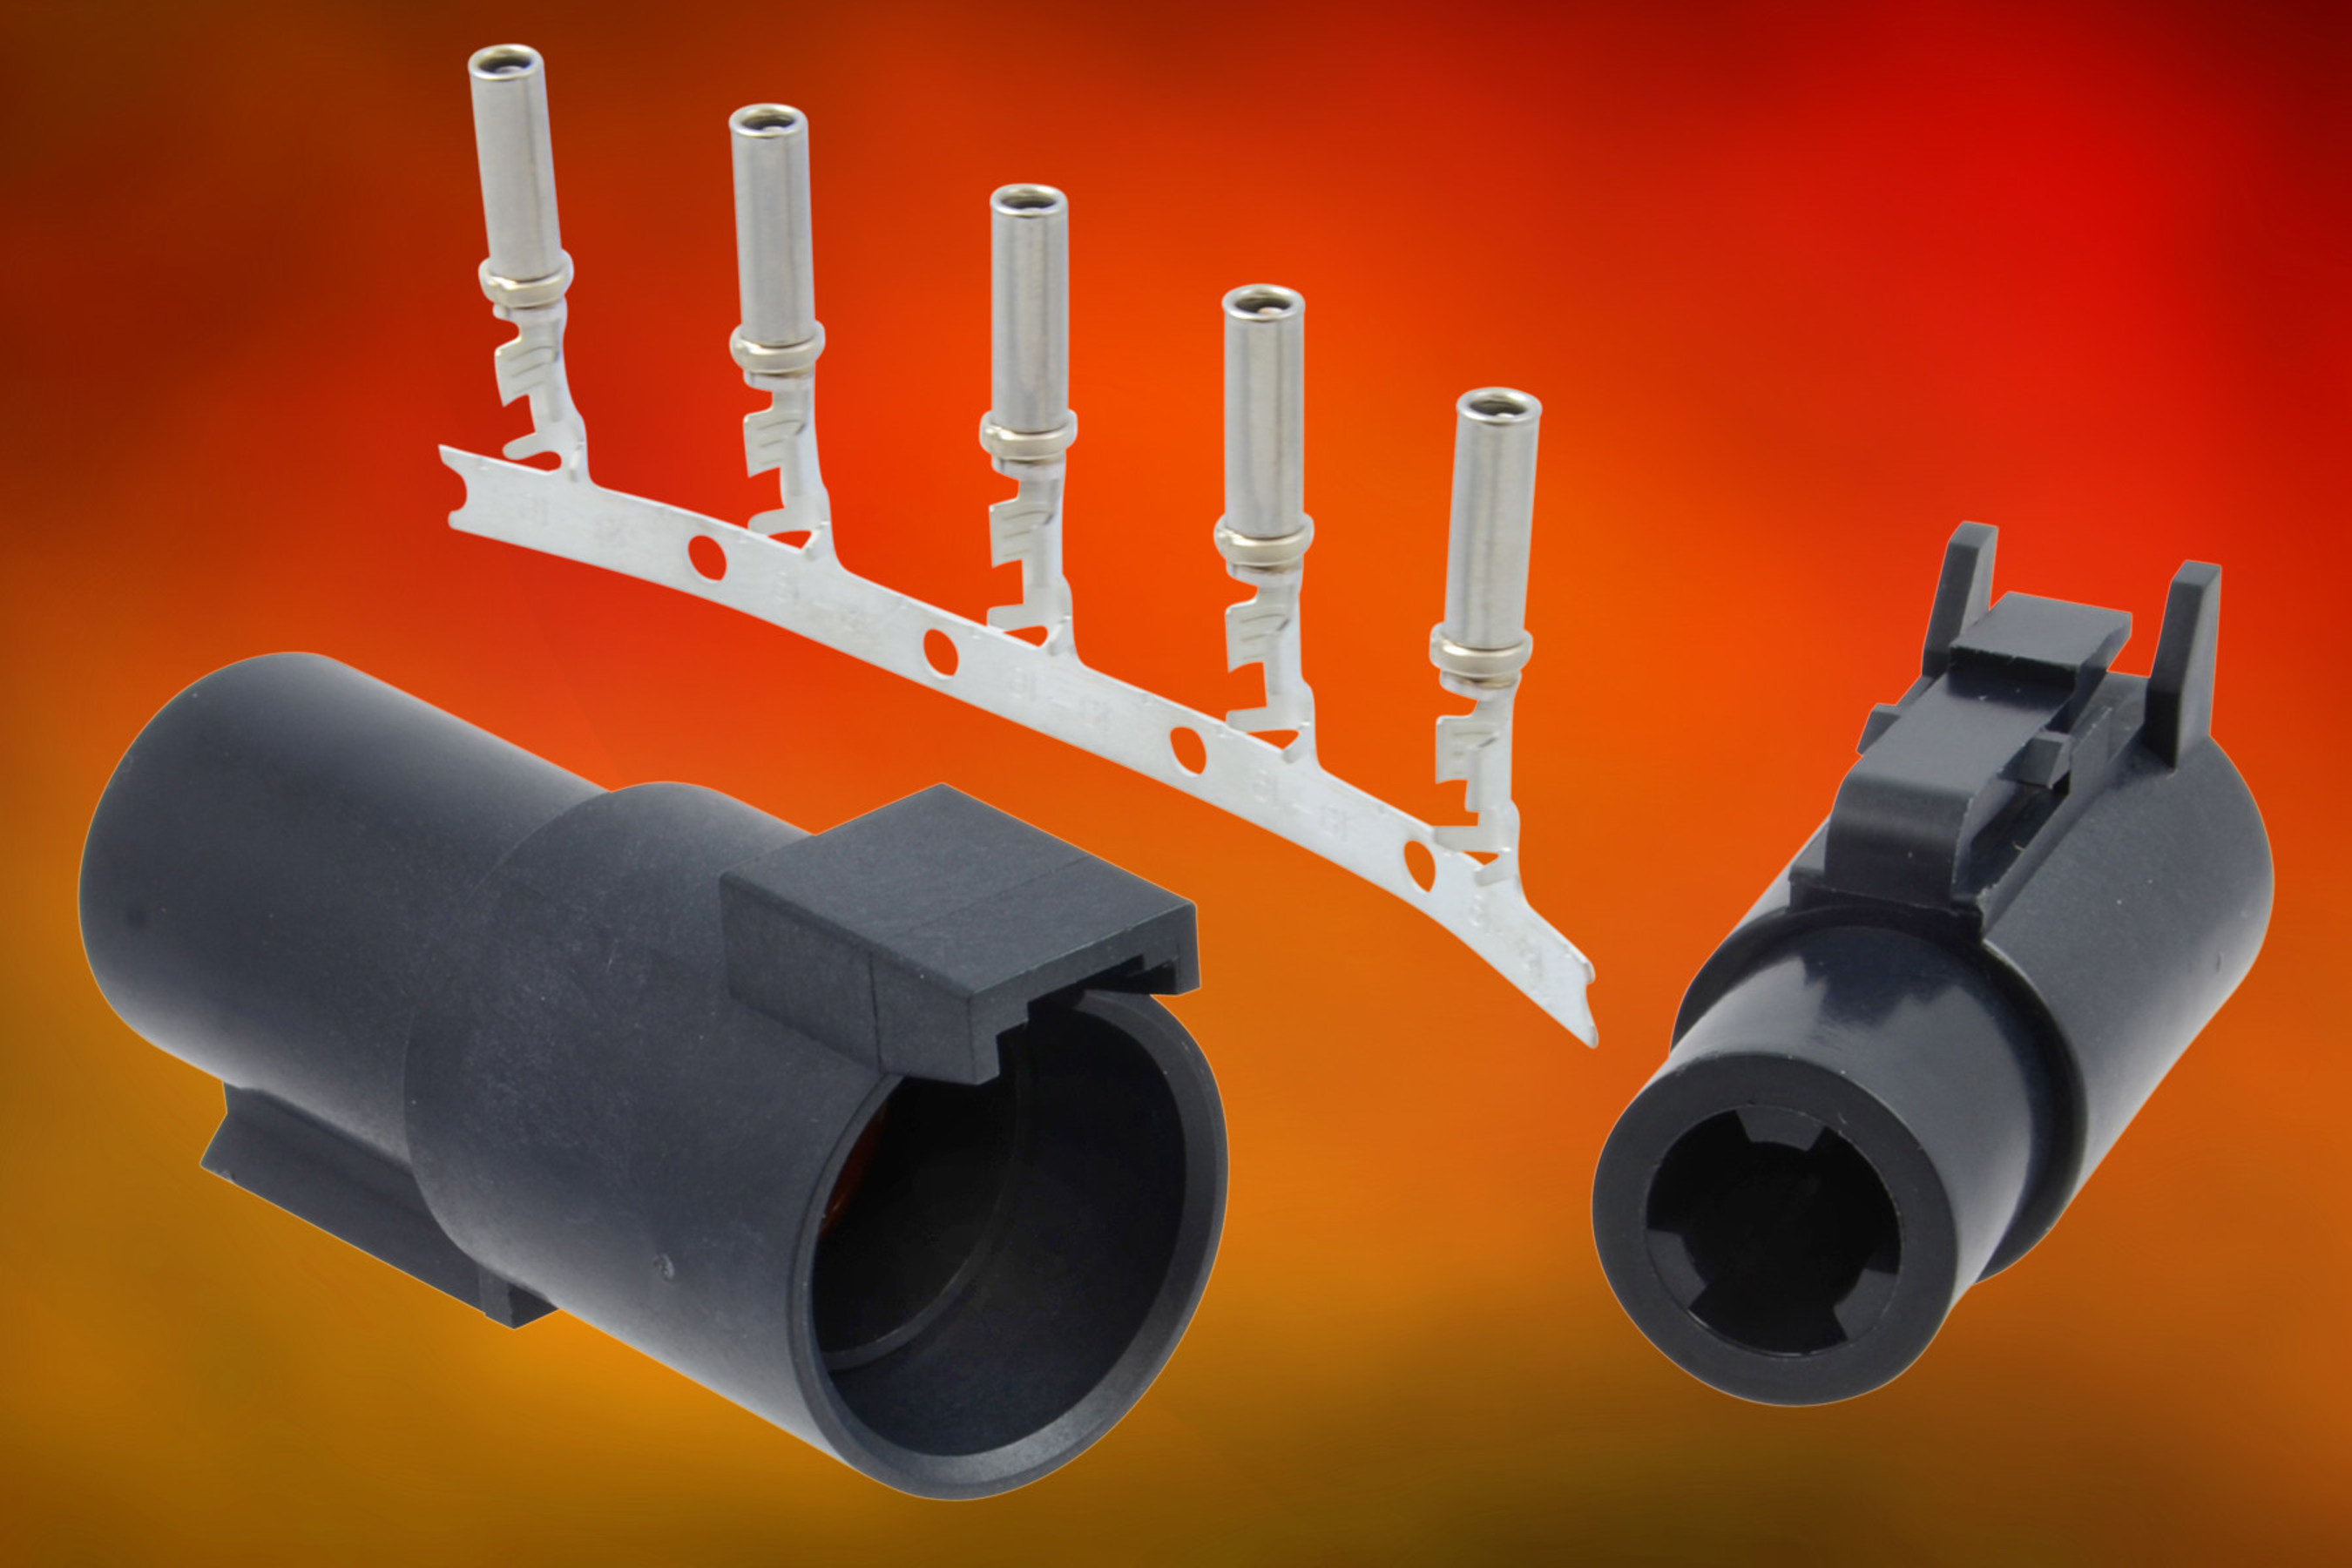 Enhanced Heavy Duty Connector Series from Amphenol Now Offers Stamped and Formed Size 12 Terminals